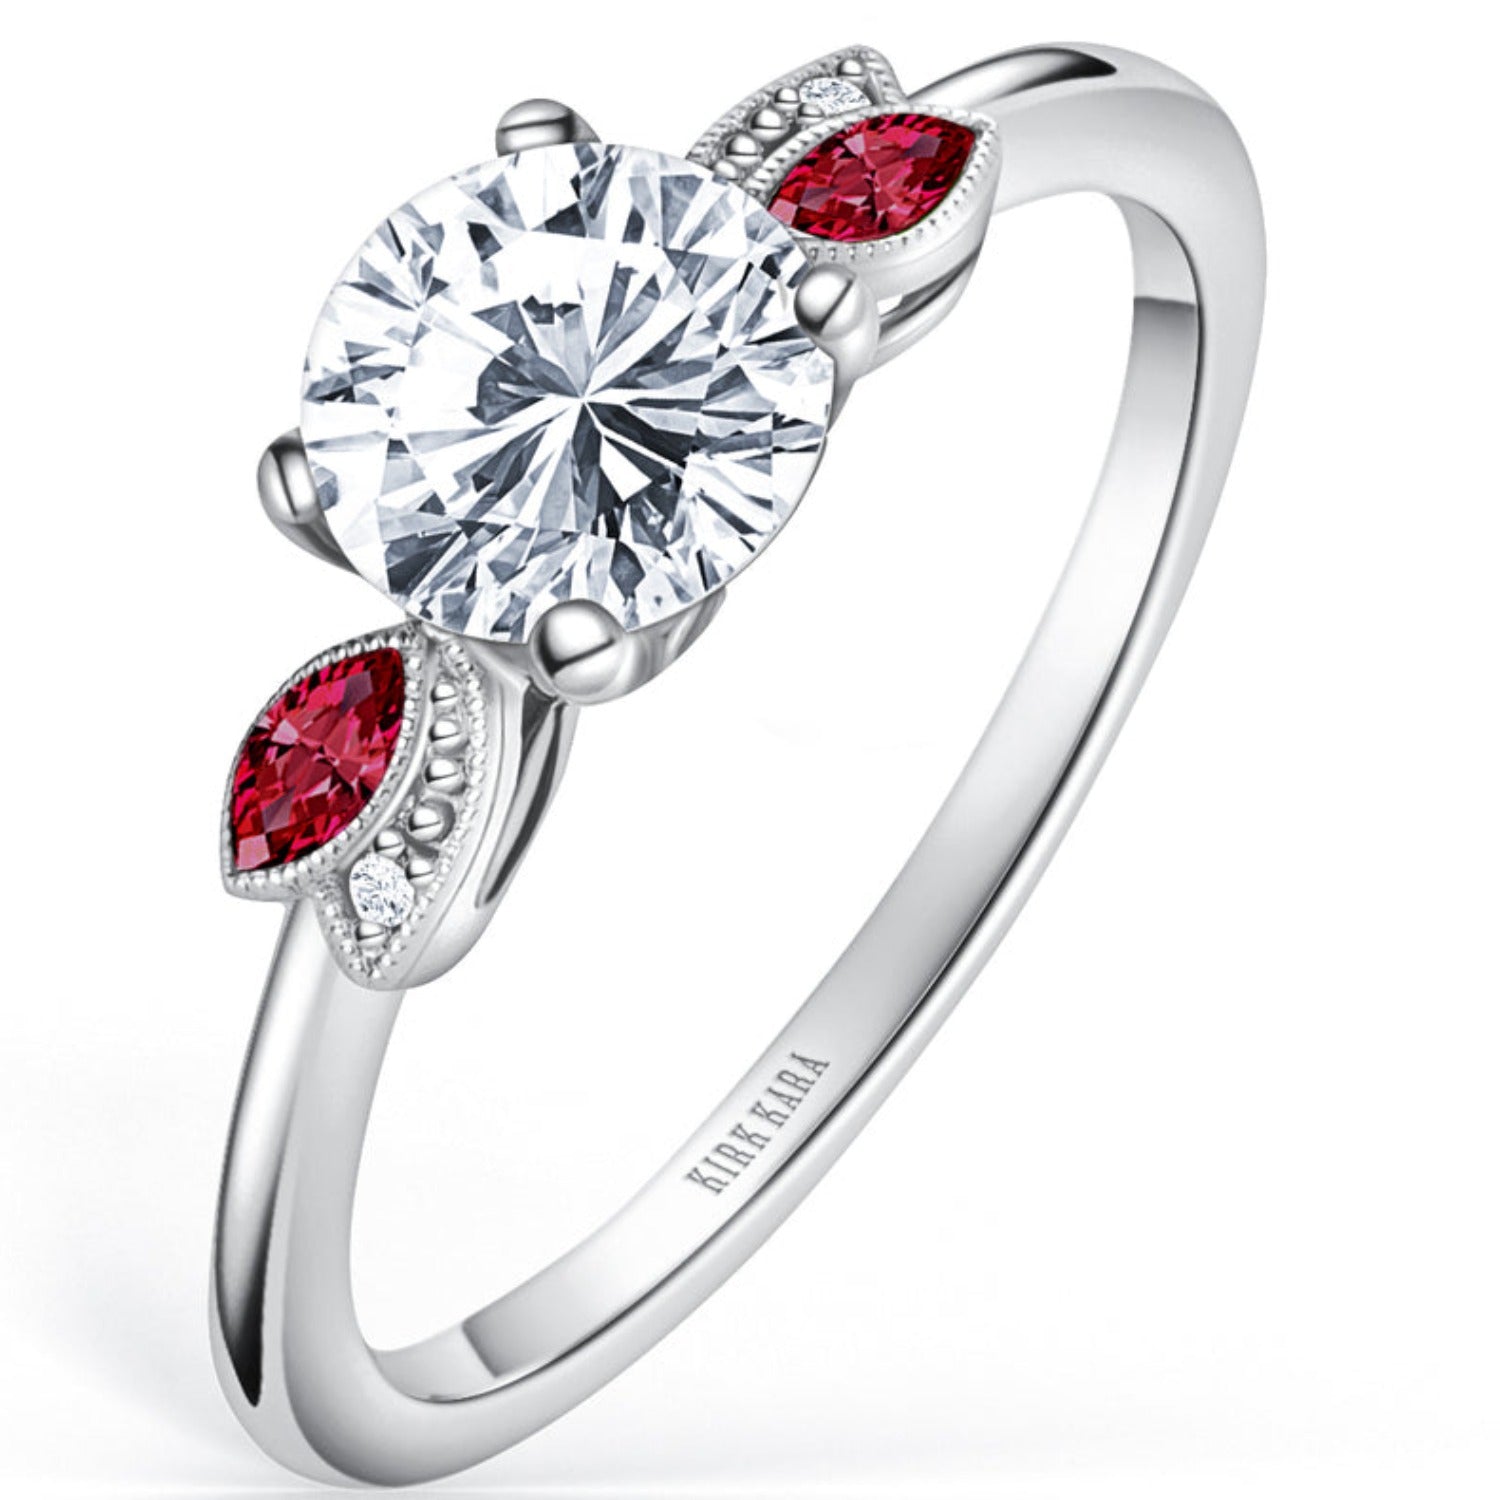 AoneJewelry Aonejewelry 1.35 Carat Round Shape Natural Red Diamond  Beautiful Antique Engagement Wedding Ring Well Crafted In 14K Solid Rose  White & Yellow Gold For Woman - Walmart.com